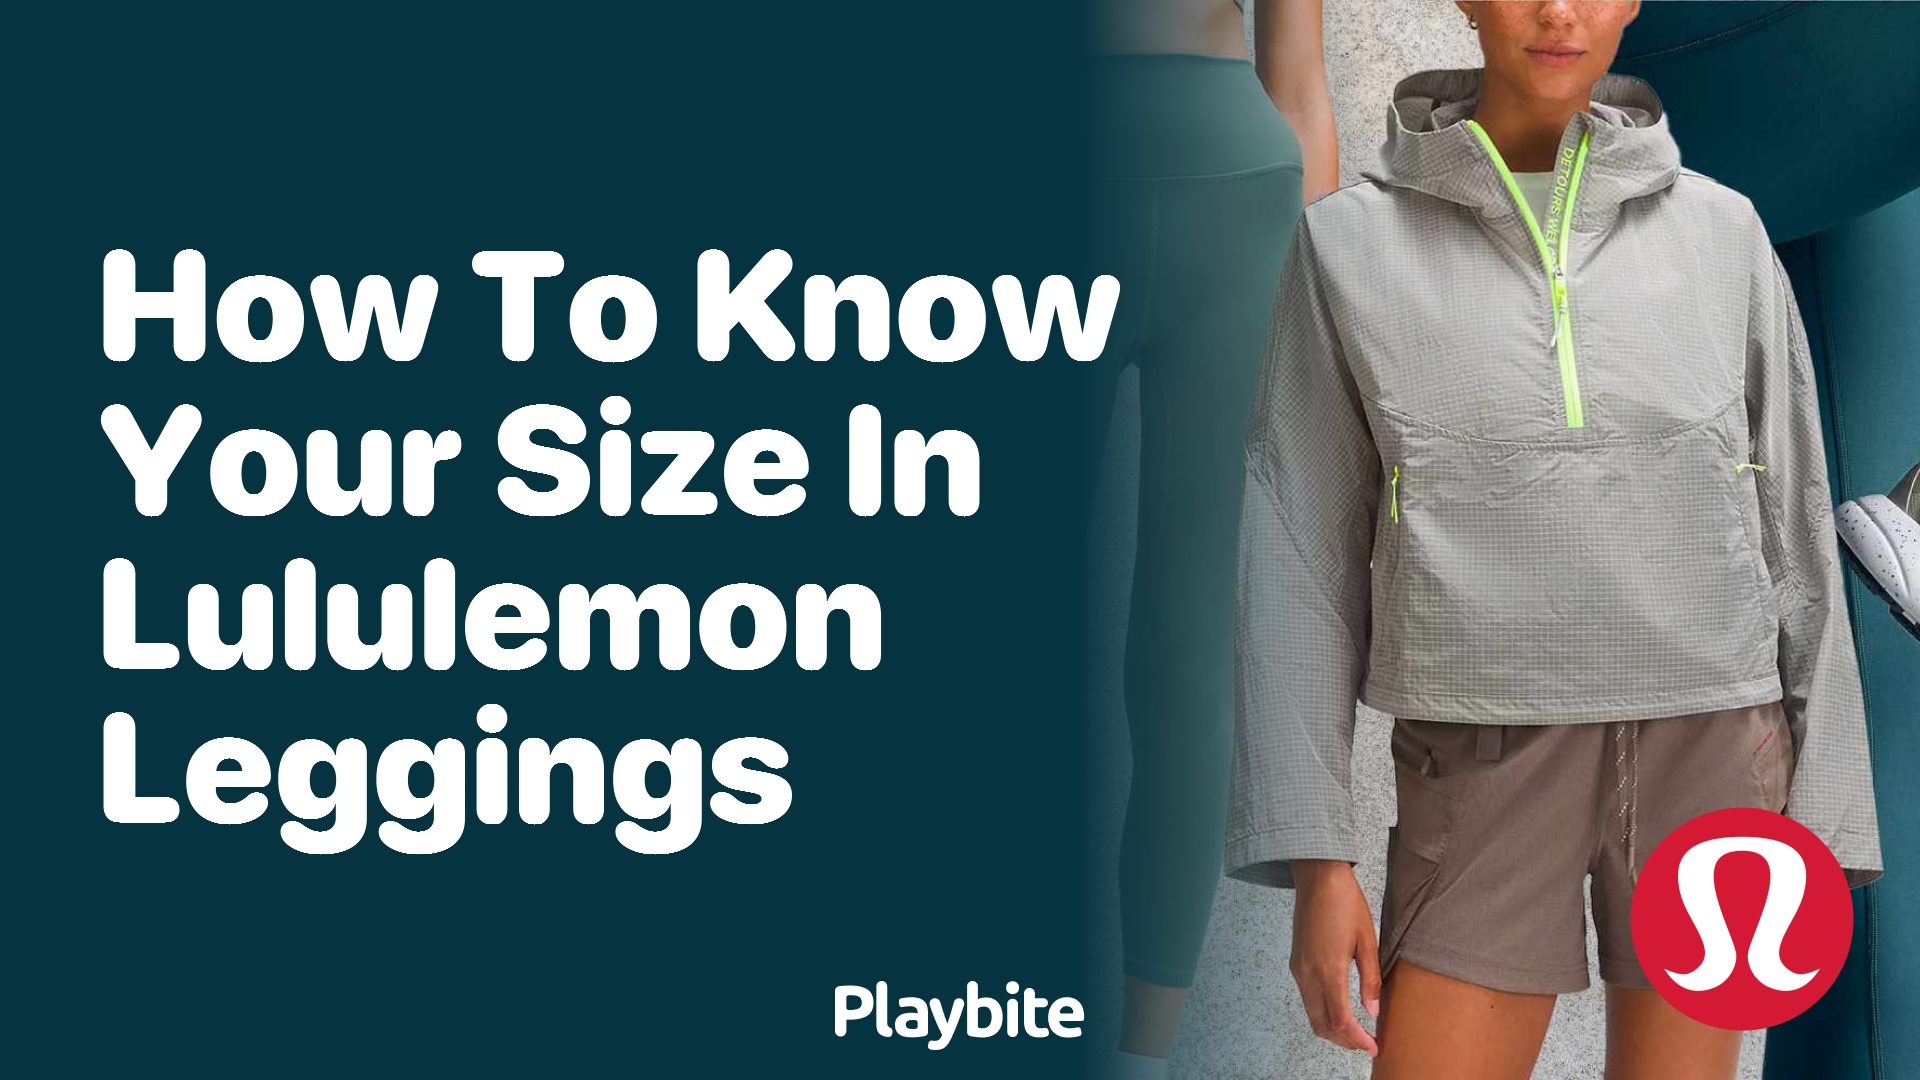 How to Know Your Size in Lululemon Leggings - Playbite